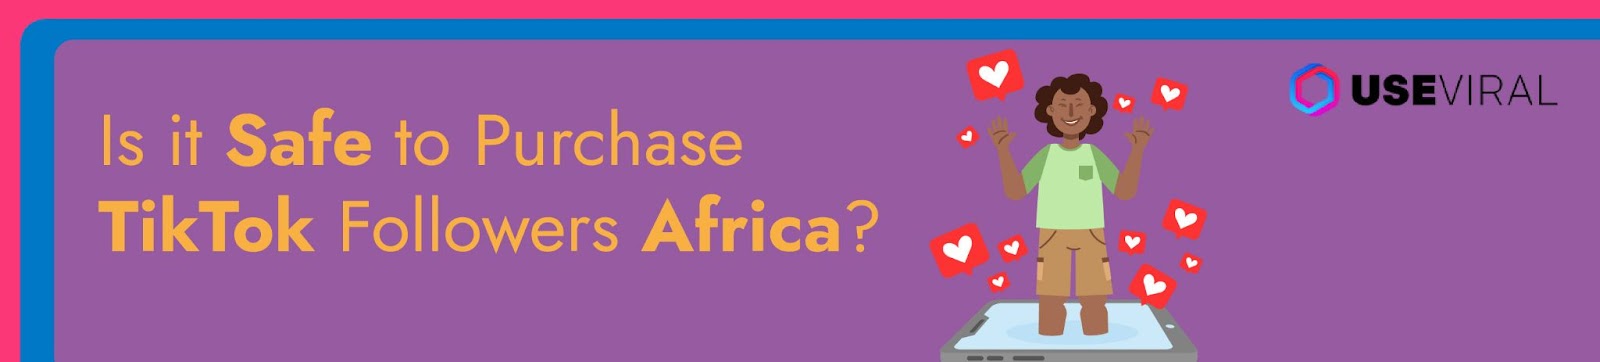 Is it Safe to Purchase TikTok Followers Africa?